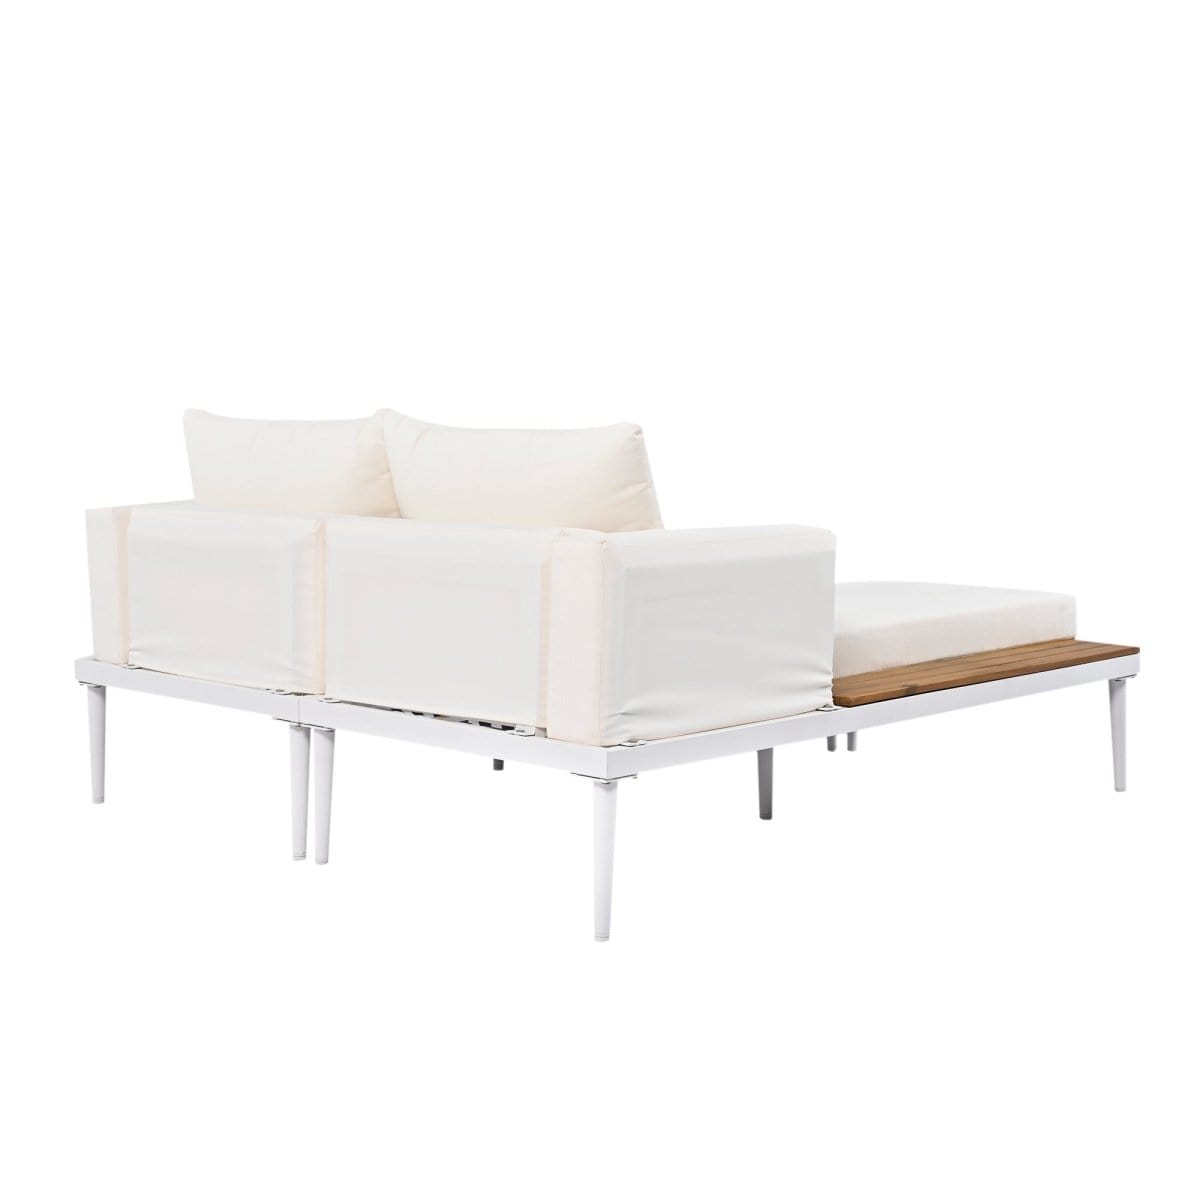 Modern Outdoor Daybed Sofa12Topmaxx